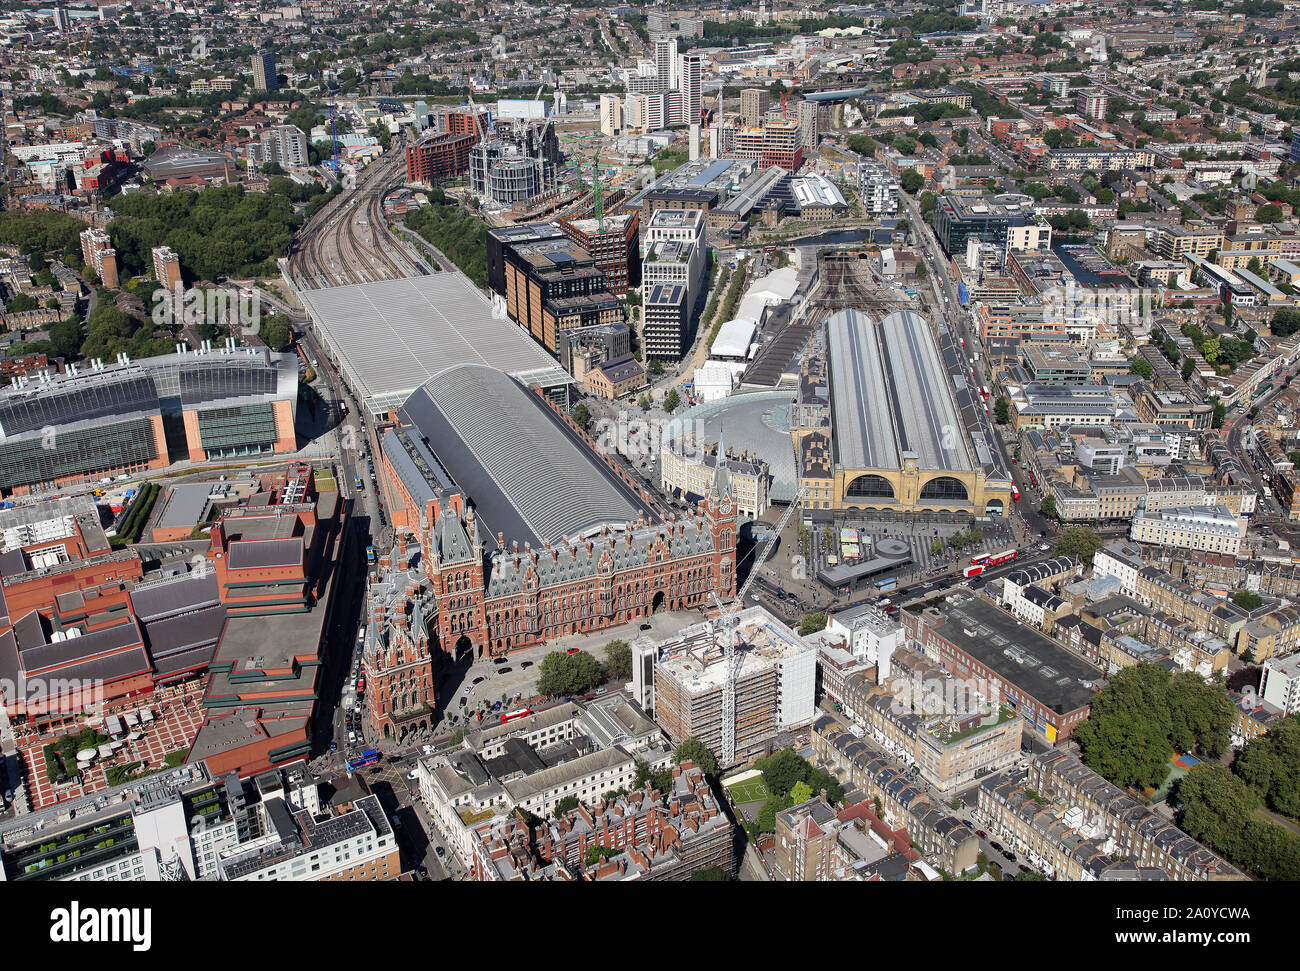 London St Pancras station and London Kings Cross station from the air. Stock Photo